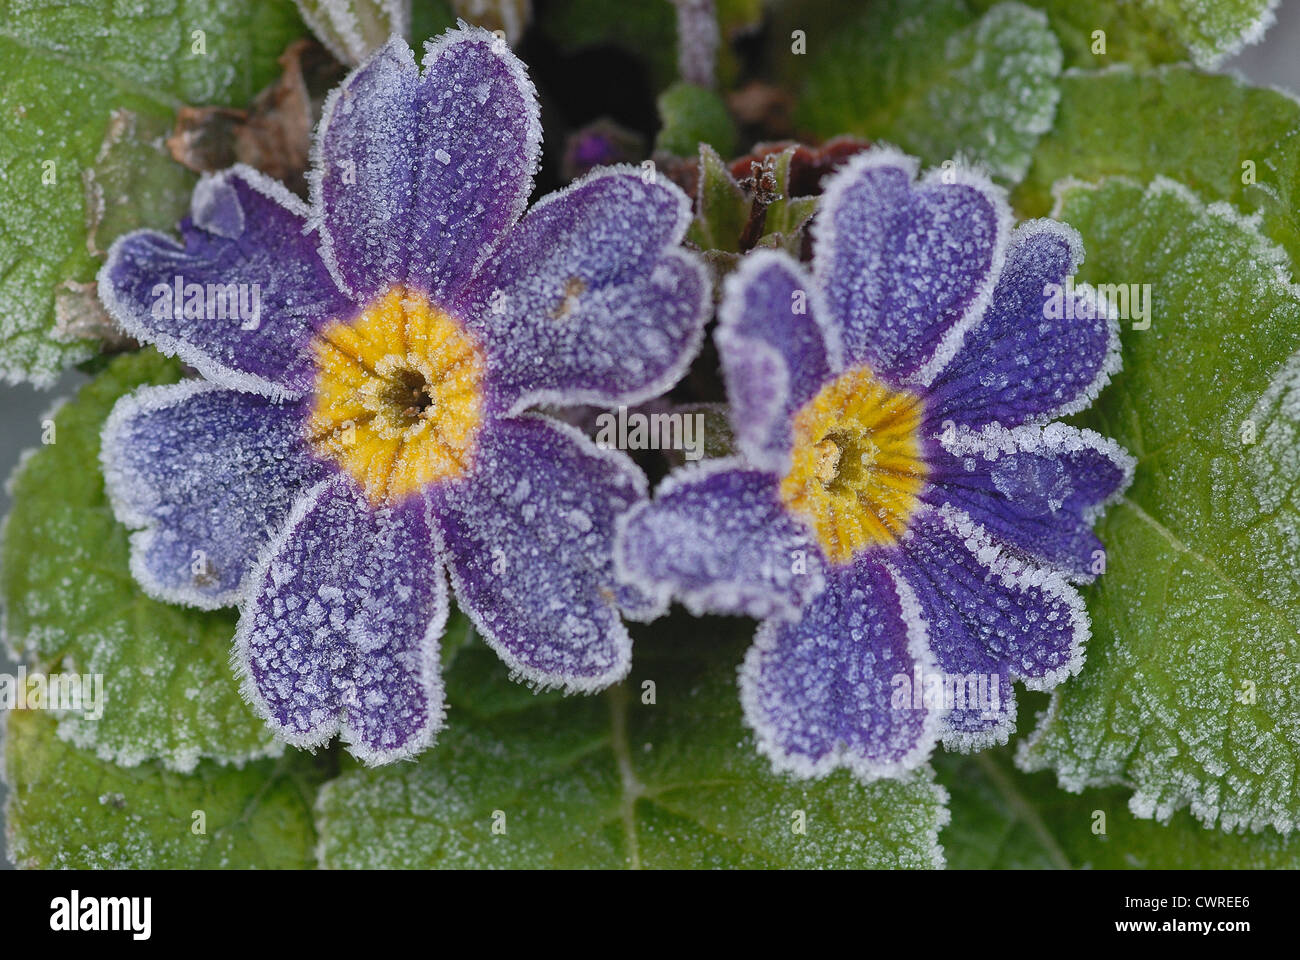 Primula, Primrose. Close up of two purple and yellow flowers with a light coating of frost. Stock Photo